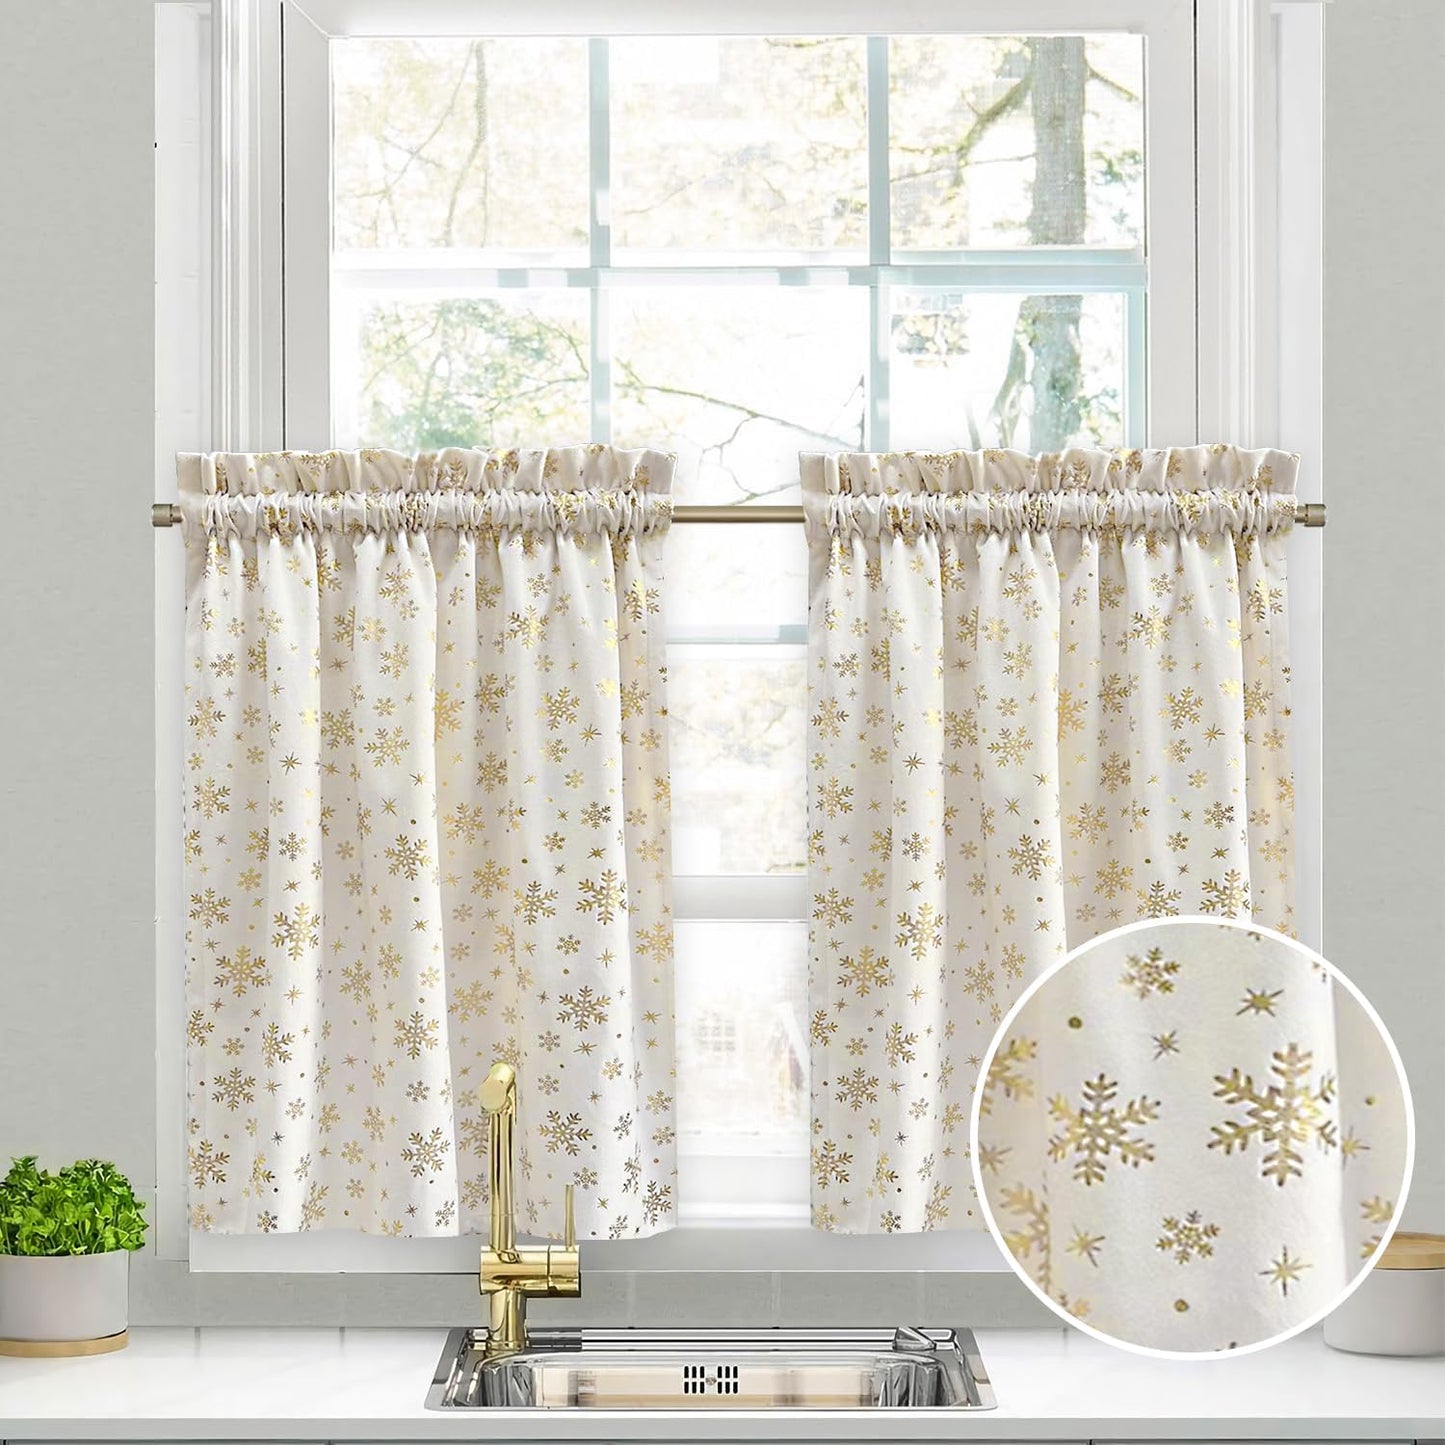 CUCRAF Blackout Curtains 84 Inches Long for Living Room, Light Beige Room Darkening Window Curtain Panels, Rod Pocket Thermal Insulated Solid Drapes for Bedroom, 52X84 Inch, Set of 2 Panels  CUCRAF Cream White 45"L X 27"W 